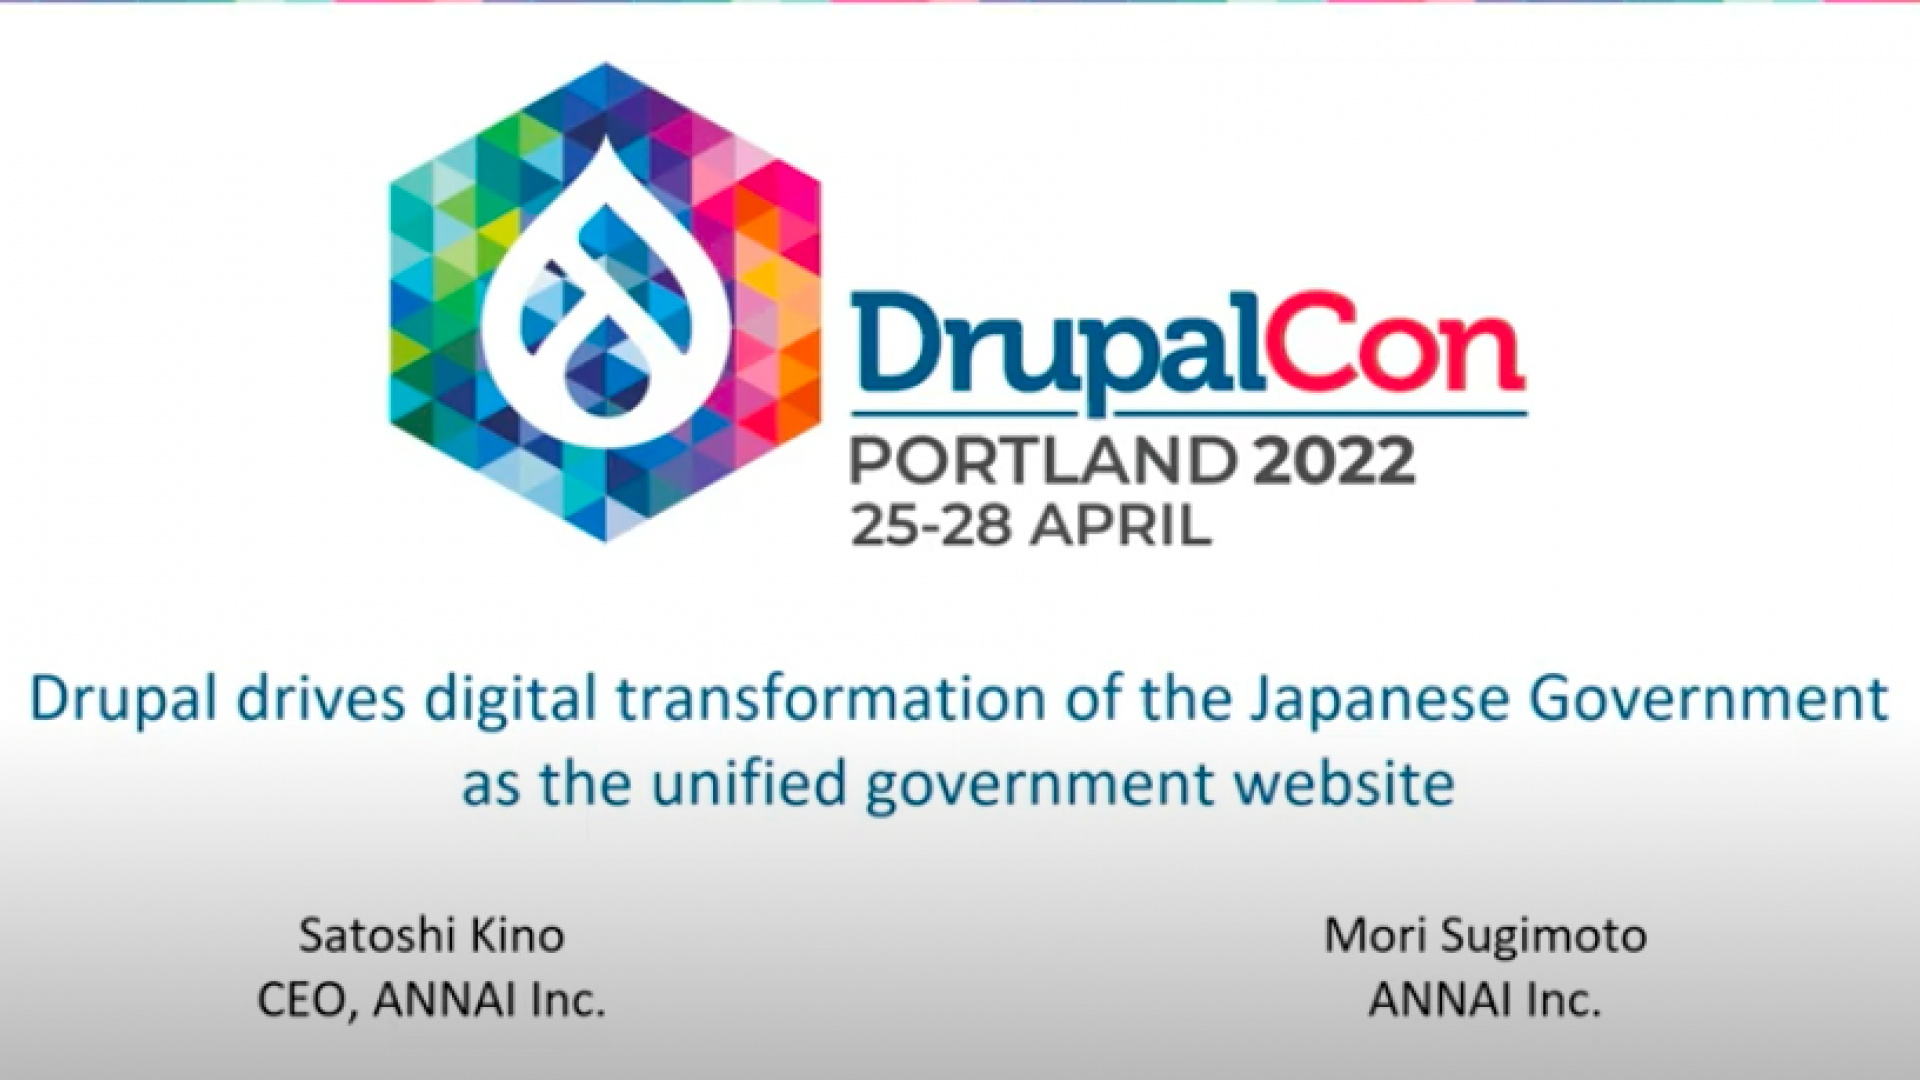 Drupal drives digital transformation of the Japanese Govermment as the unified government website